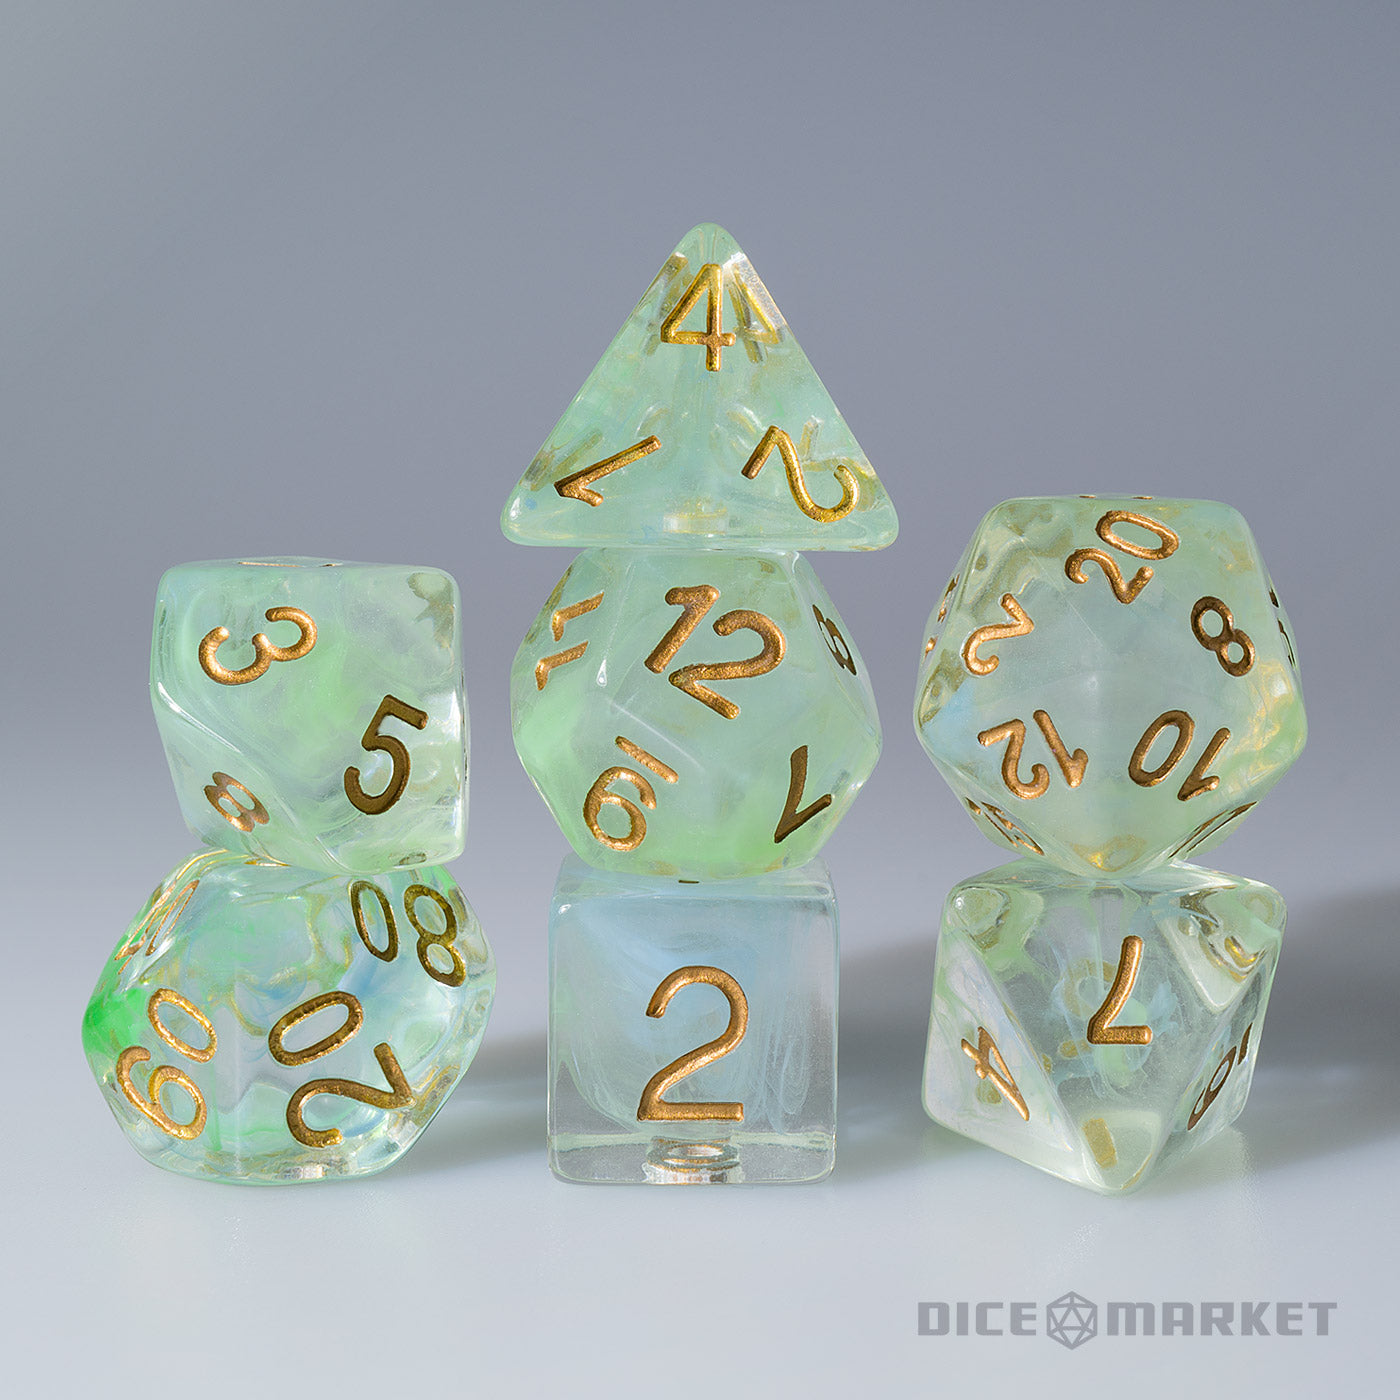 Teal and Light Green Swirl with Copper Ink 7pc Polyhedral Dice Set